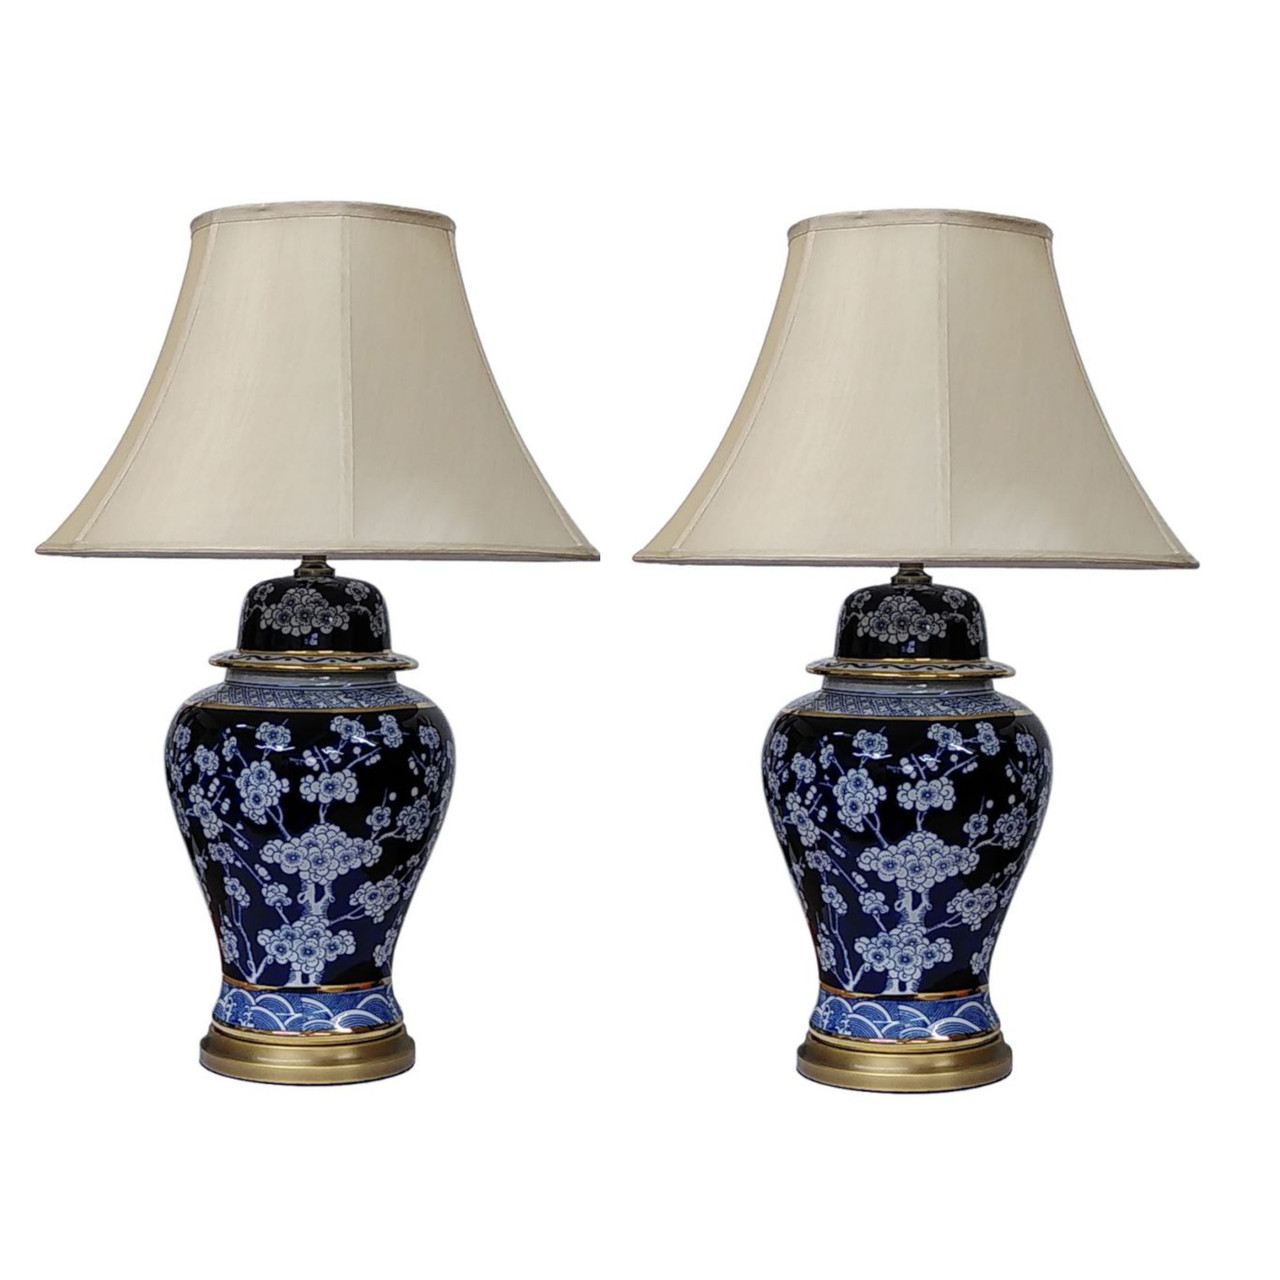 Pair of Chinese Jar Table Lamps with Shades - Blue and White Blossom Pattern - 75cm